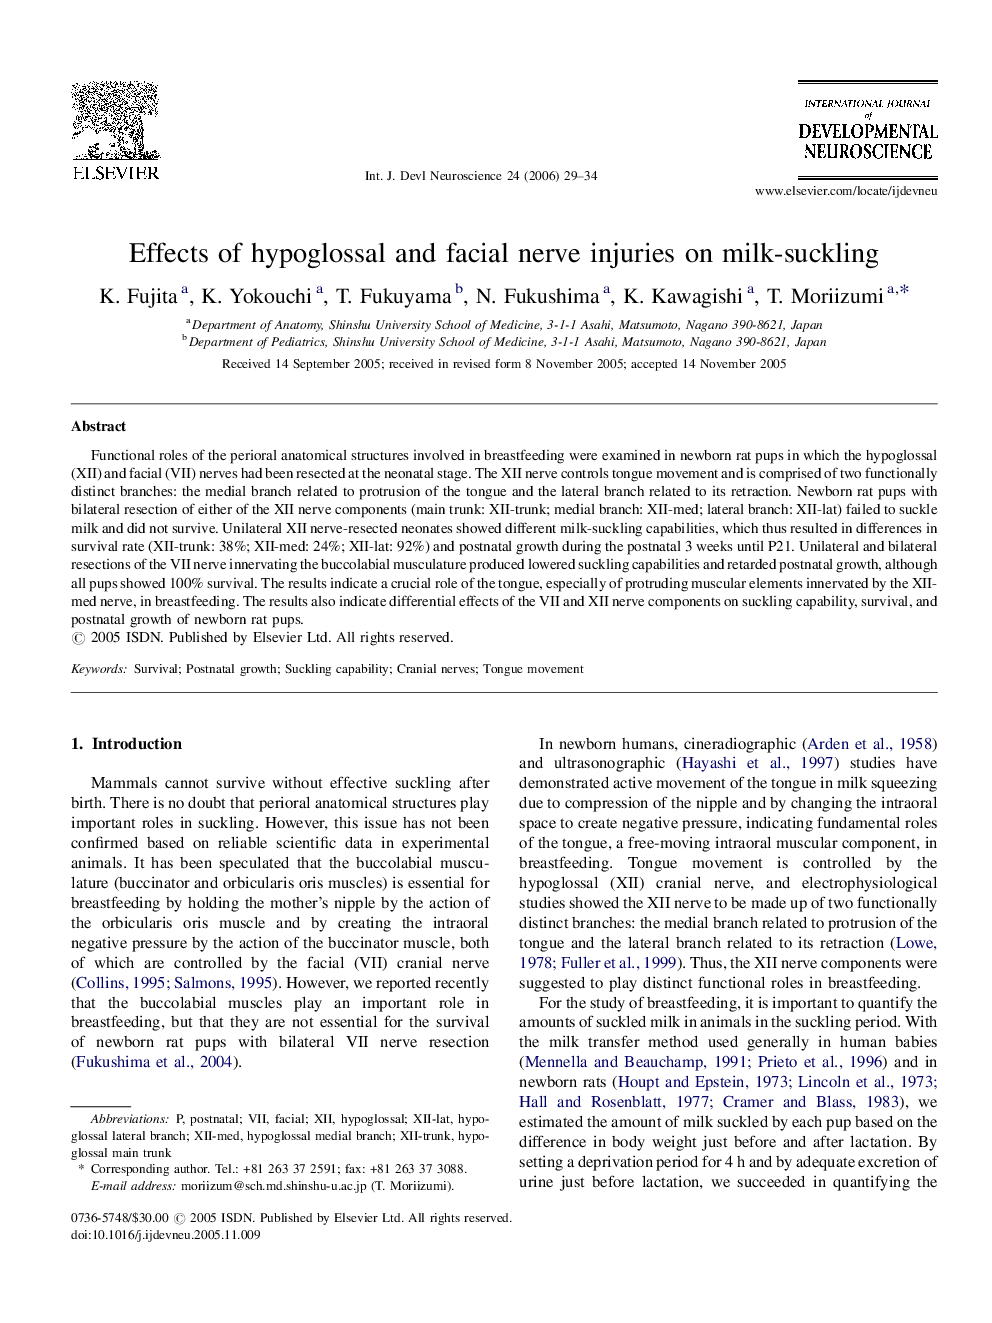 Effects of hypoglossal and facial nerve injuries on milk-suckling